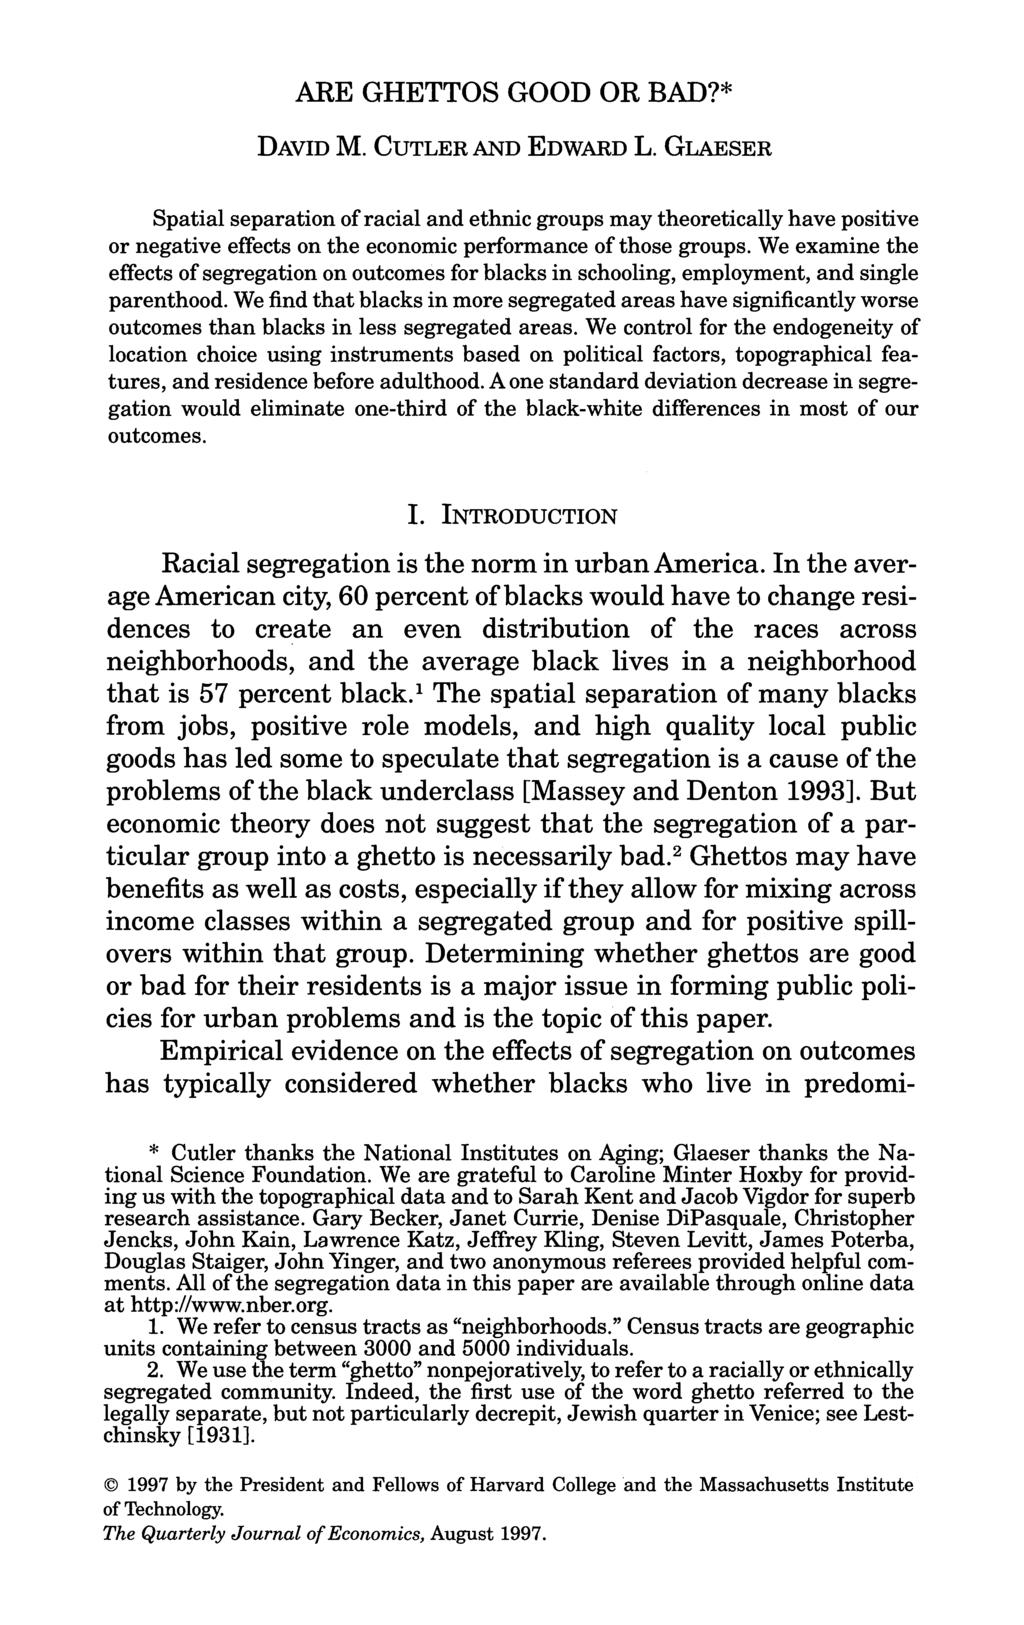 ARE GHETTOS GOOD OR BAD?* Spatial separation of racial and ethnic groups may theoretically have positive or negative effects on the economic performance of those groups.